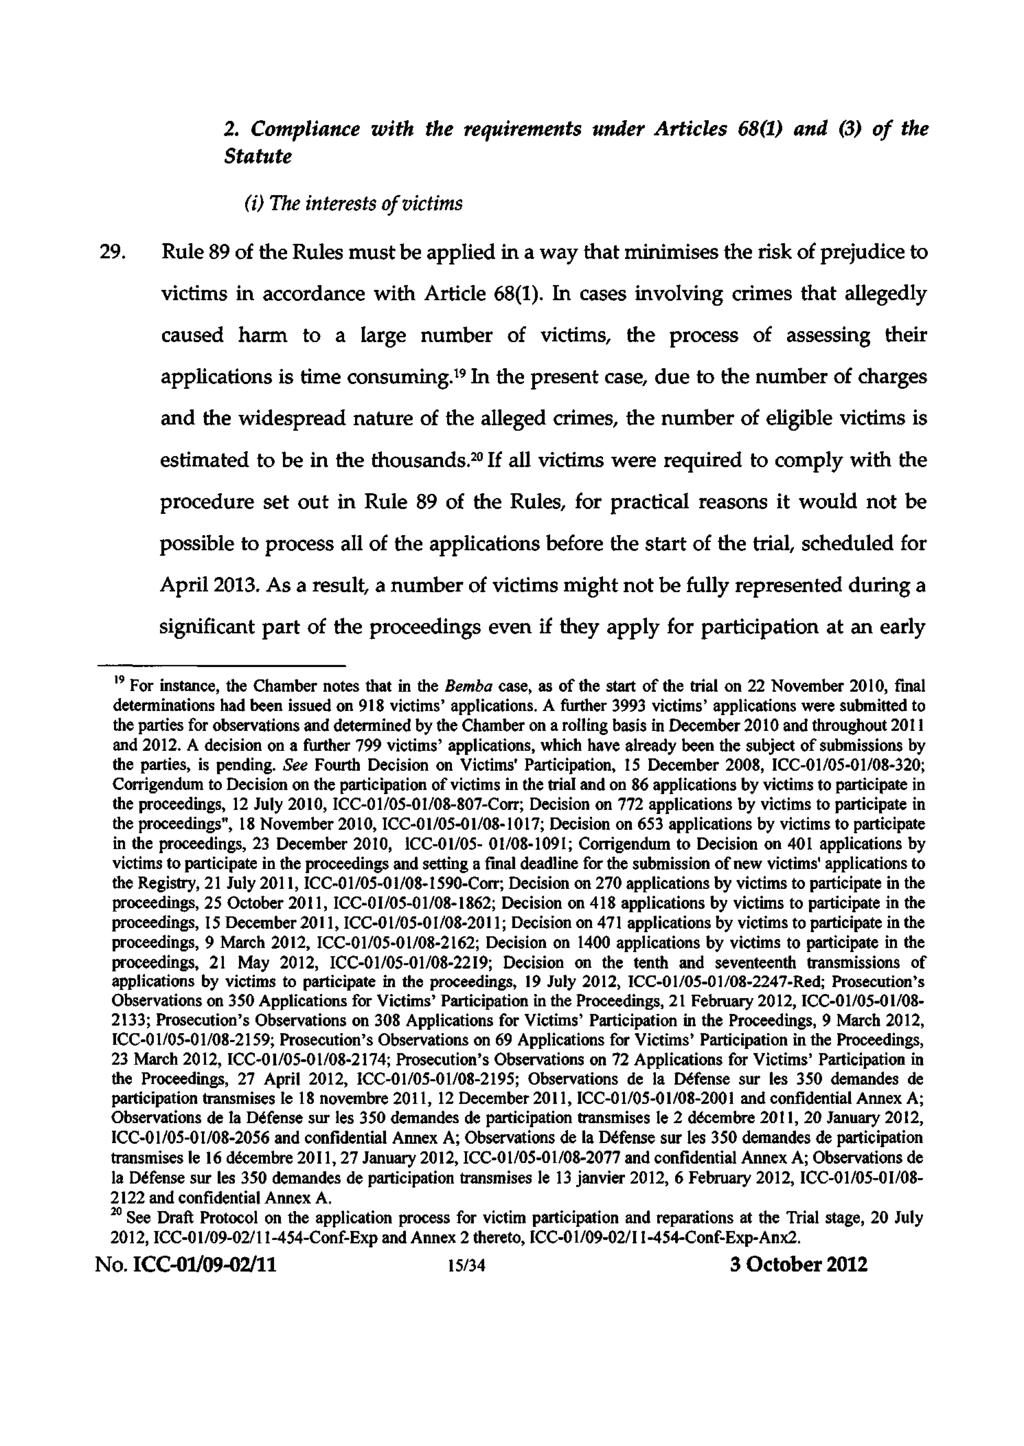 ICC-01/09-02/11-498 03-10-2012 15/34 RH T 2. Compliance with the requirements under Articles 68(1) and (3) of the Statute (i) The interests of victims 29.